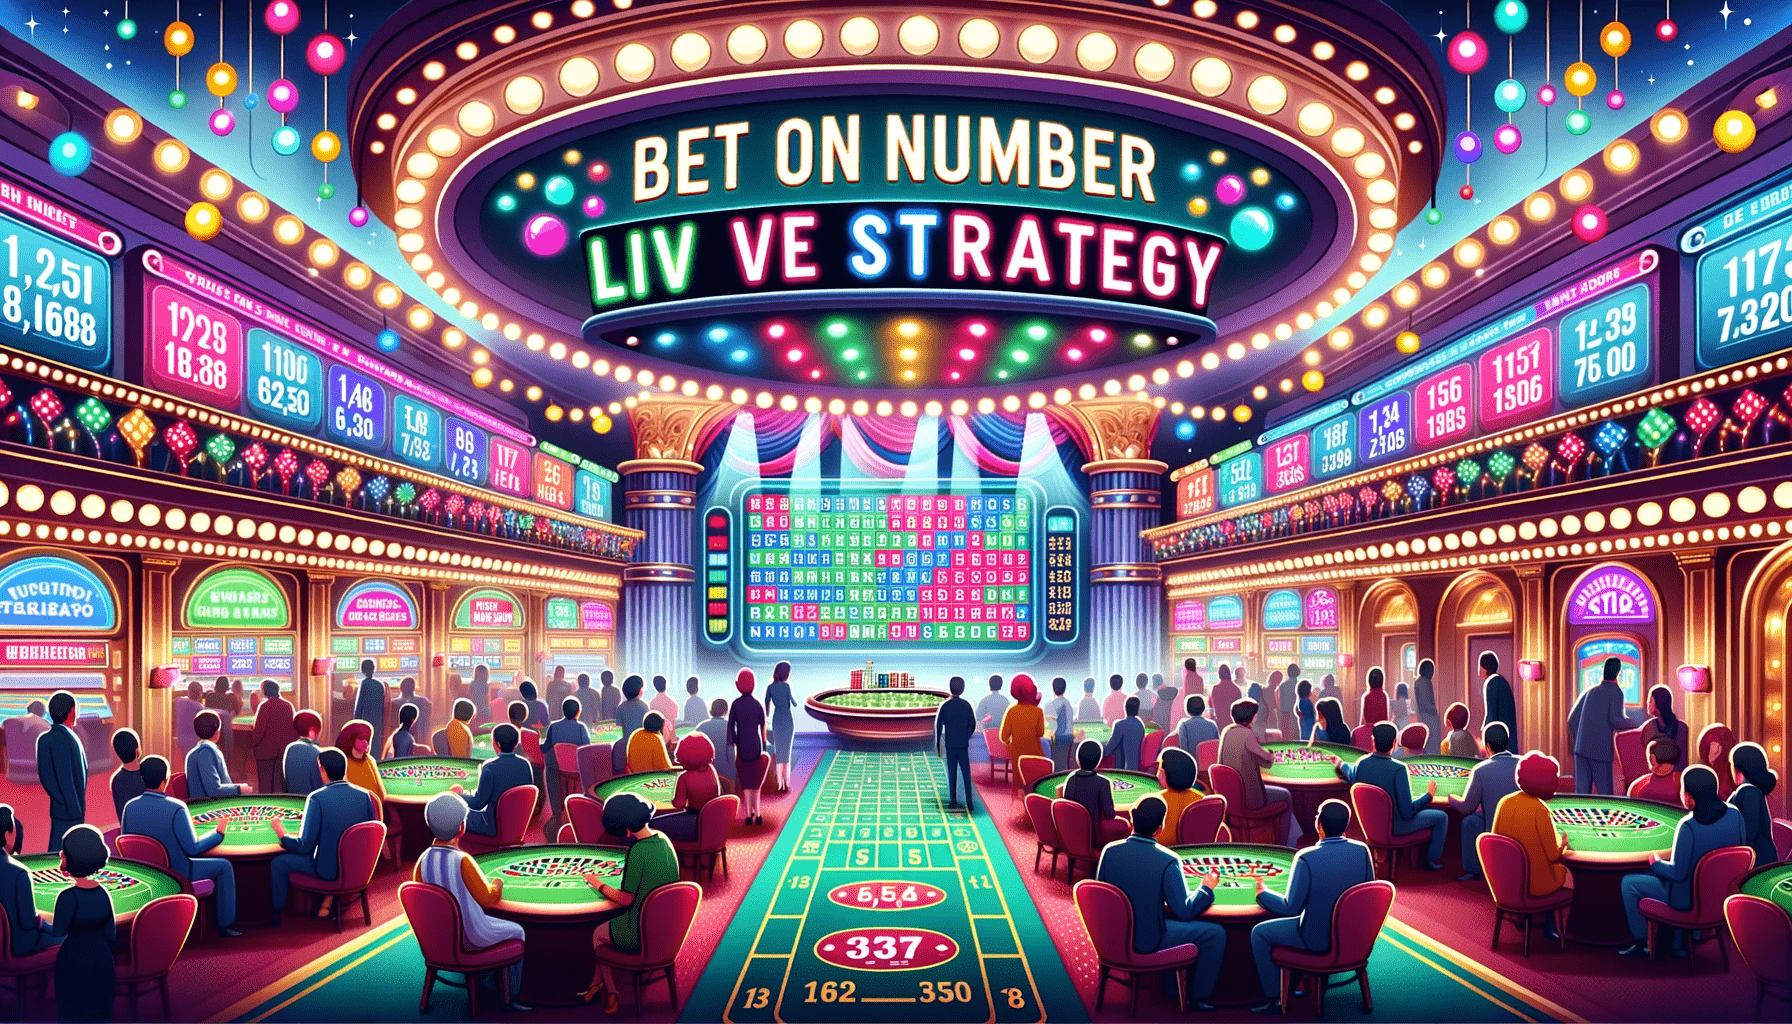 Bet on number live strategy